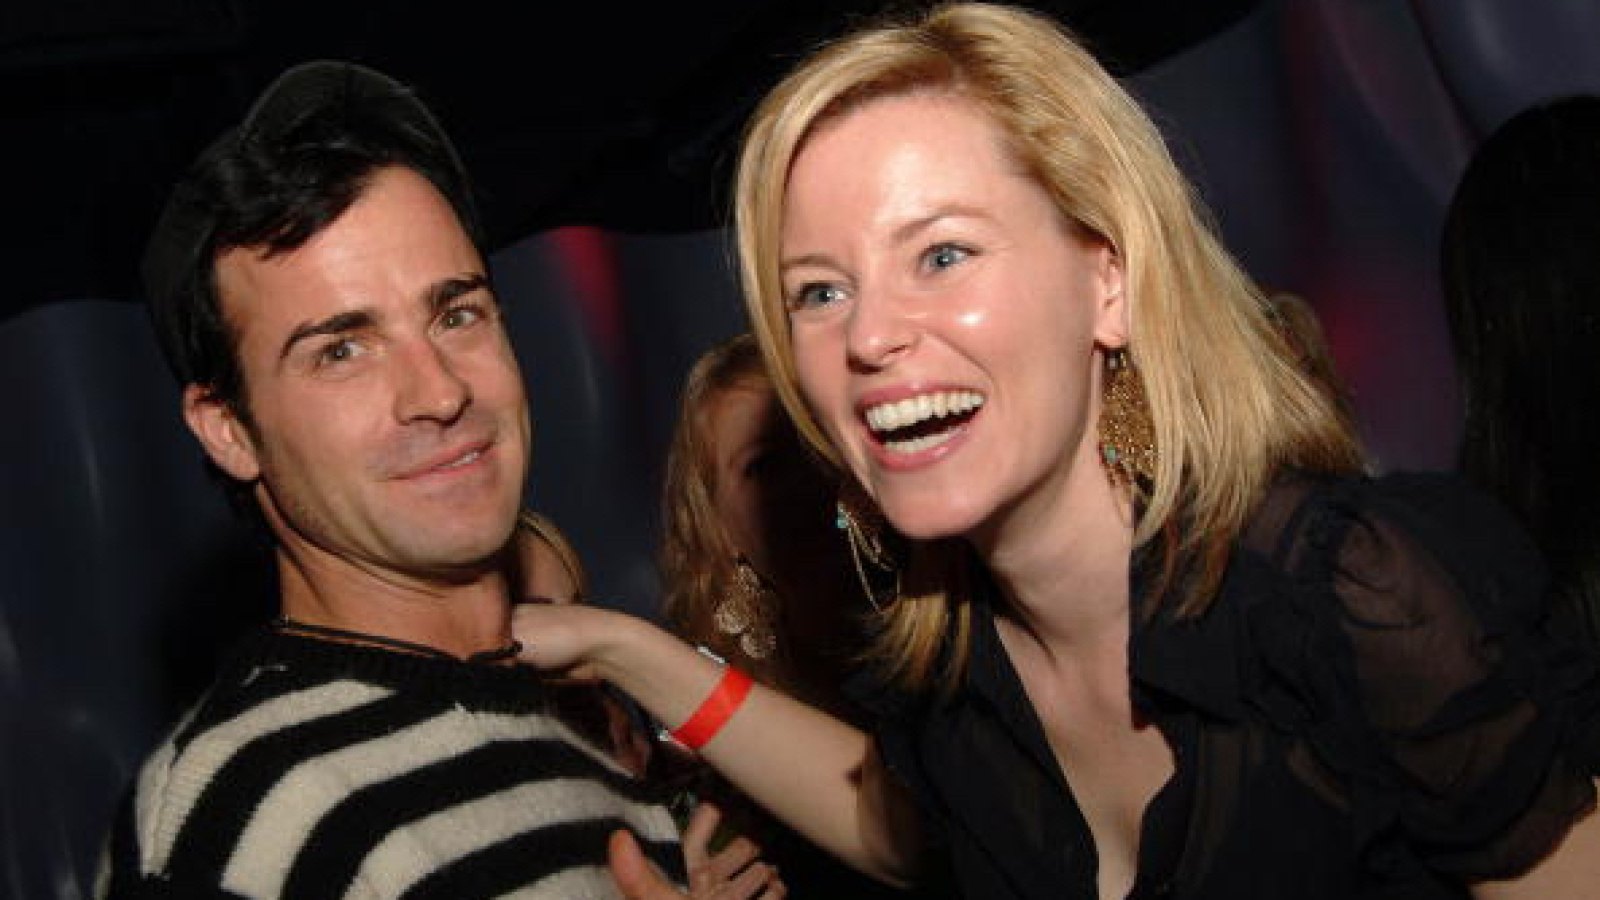 Justin Theroux and Elizabeth Banks